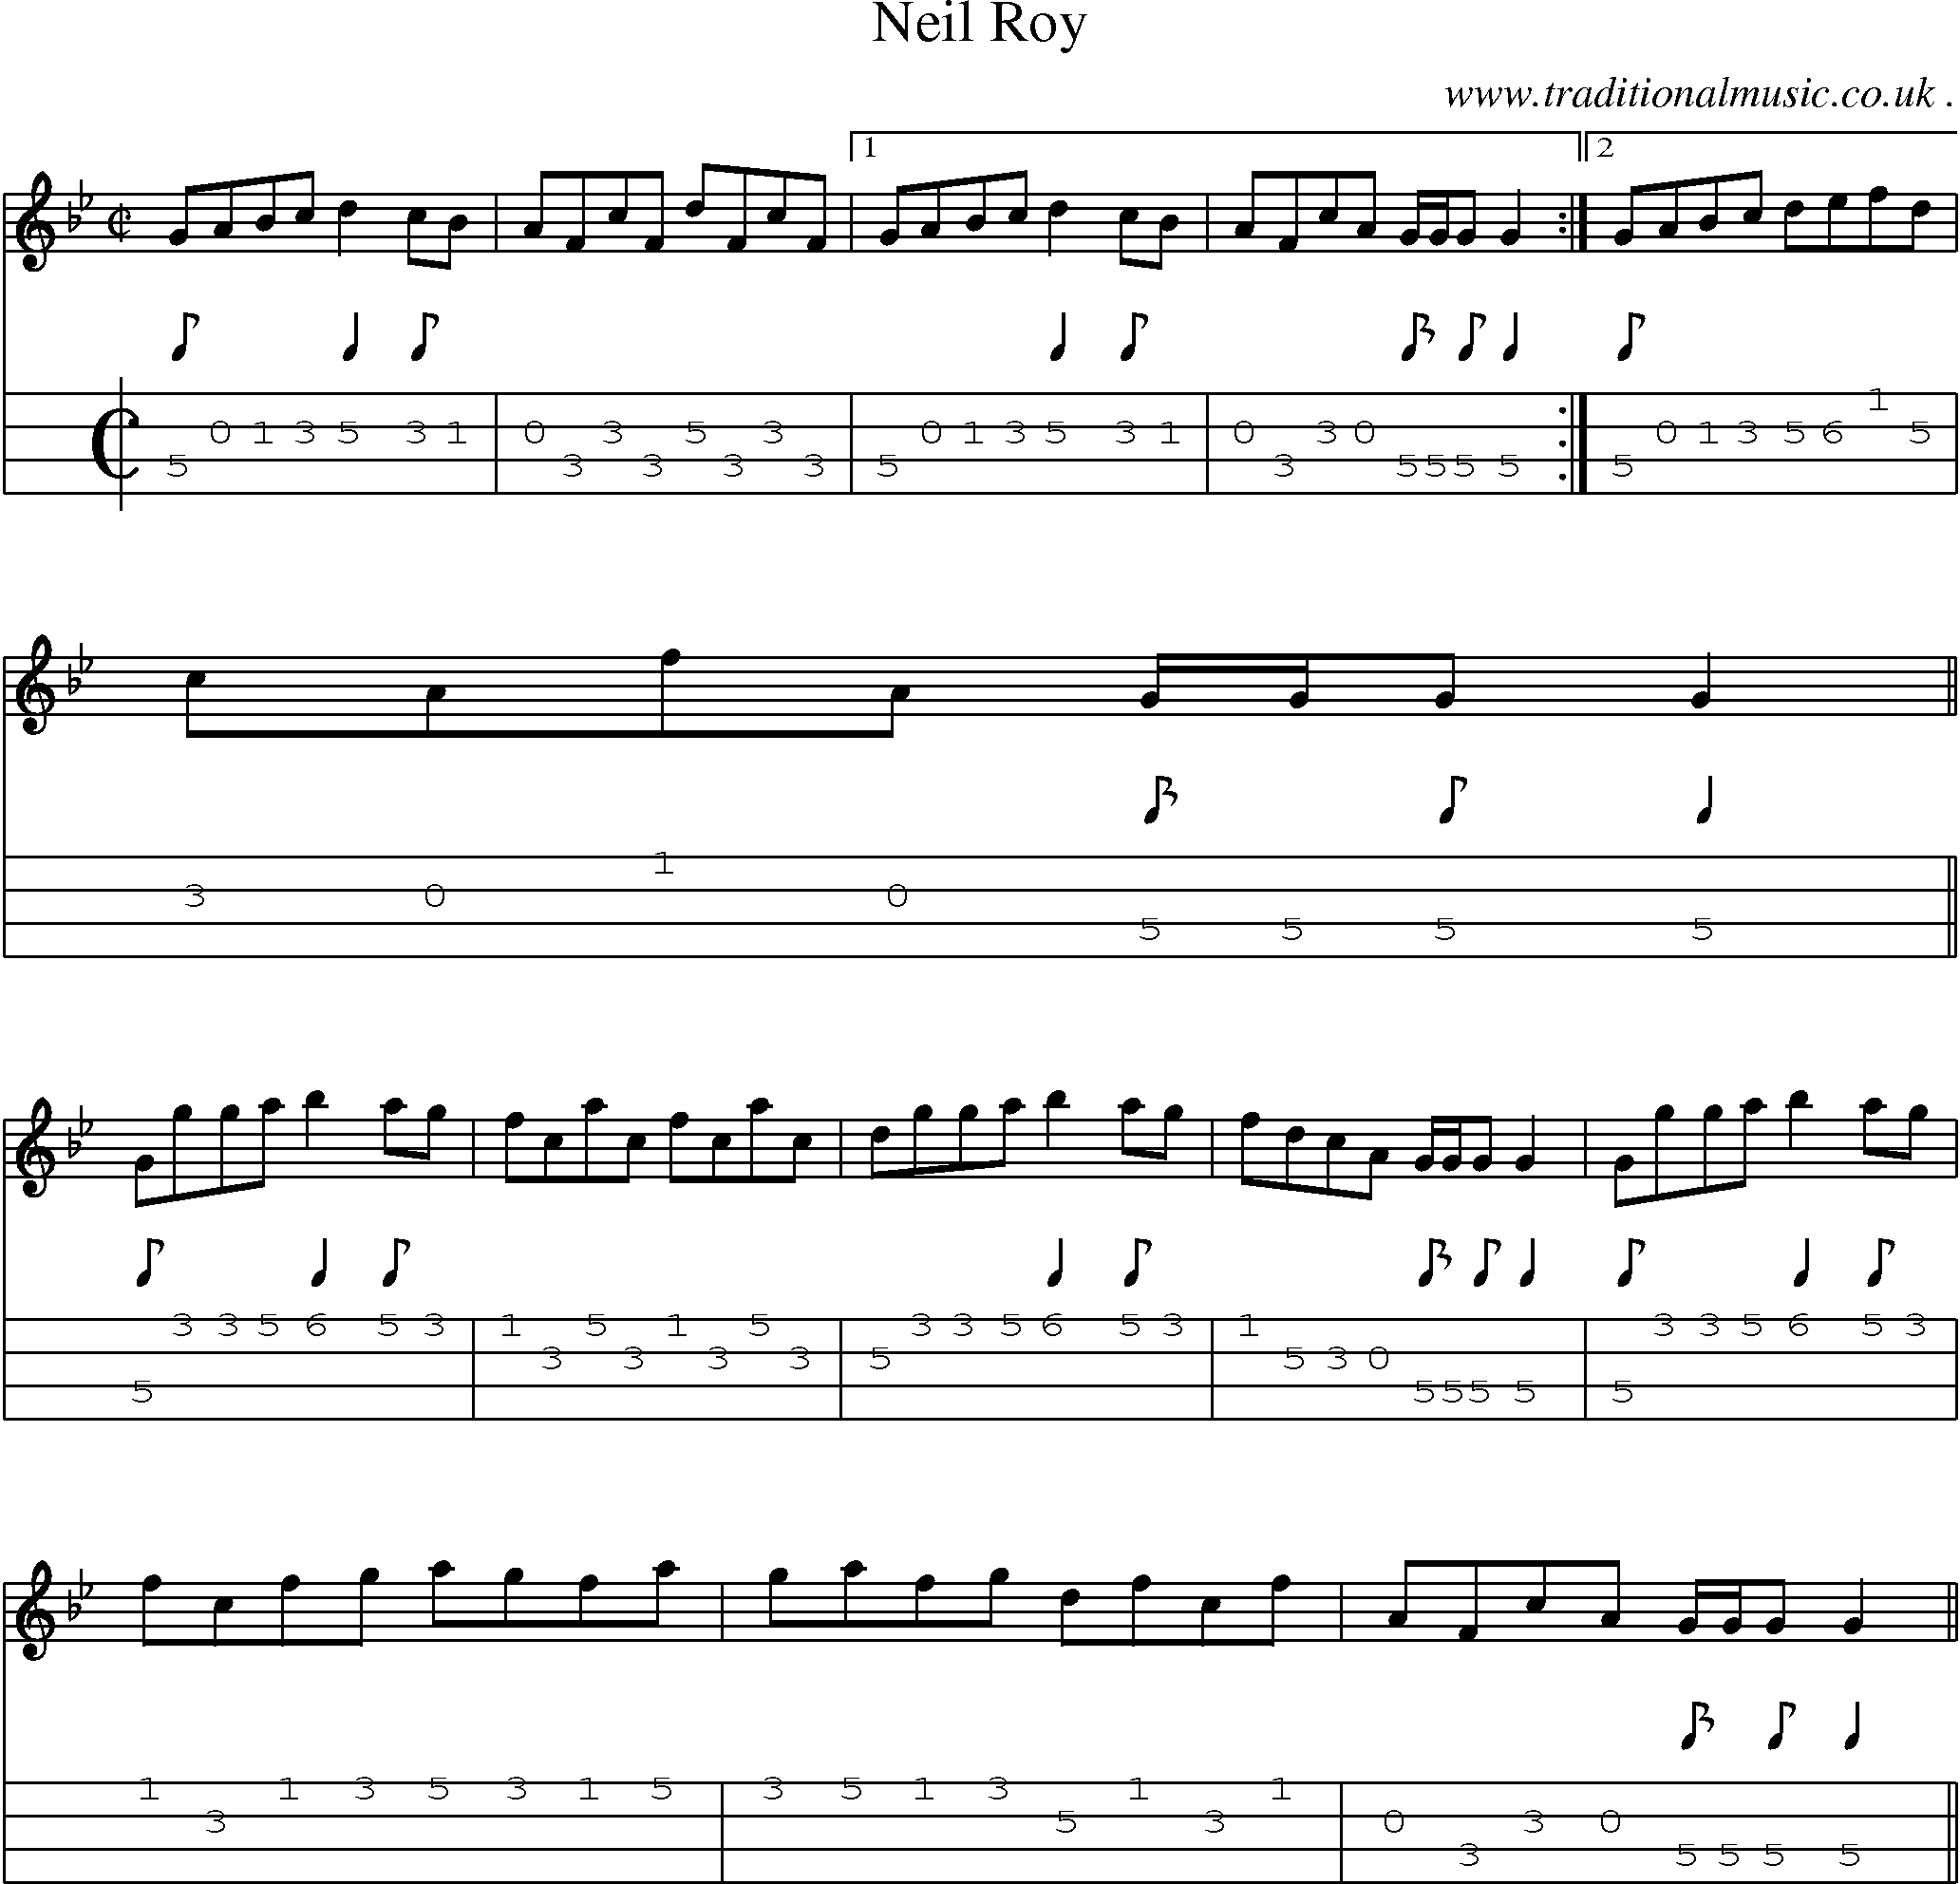 Sheet-music  score, Chords and Mandolin Tabs for Neil Roy